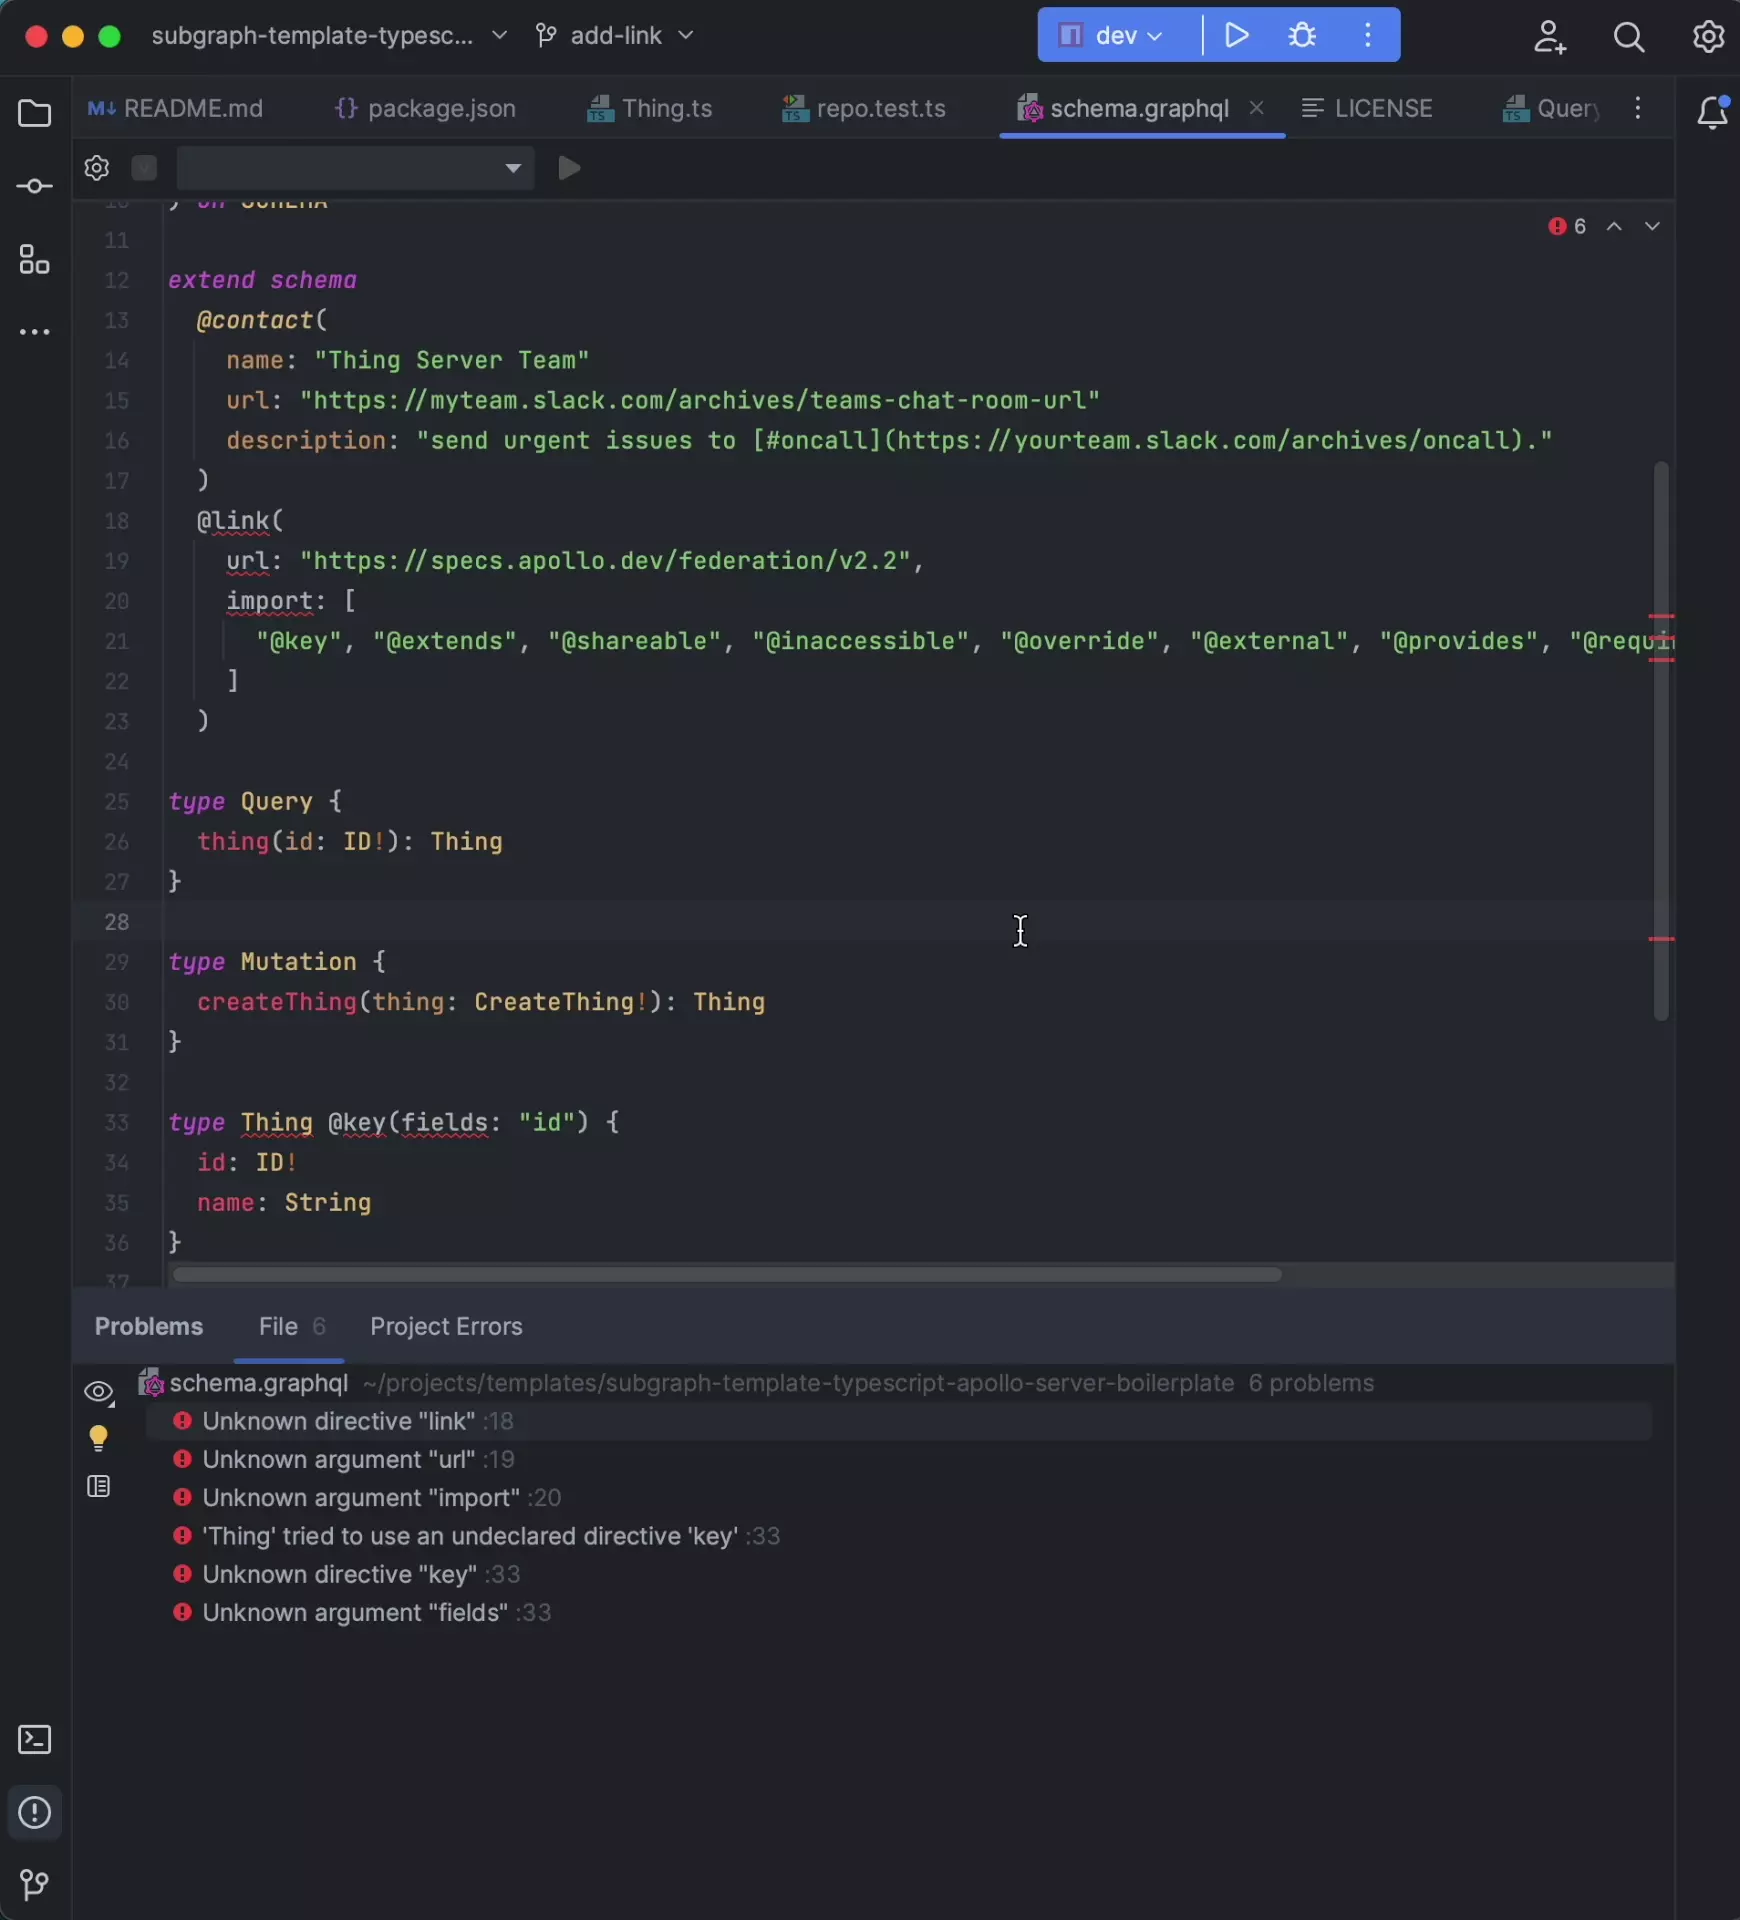 An animation showing the process of enabling Apollo Federation support in the GraphQL plugin for JetBrains (described above)